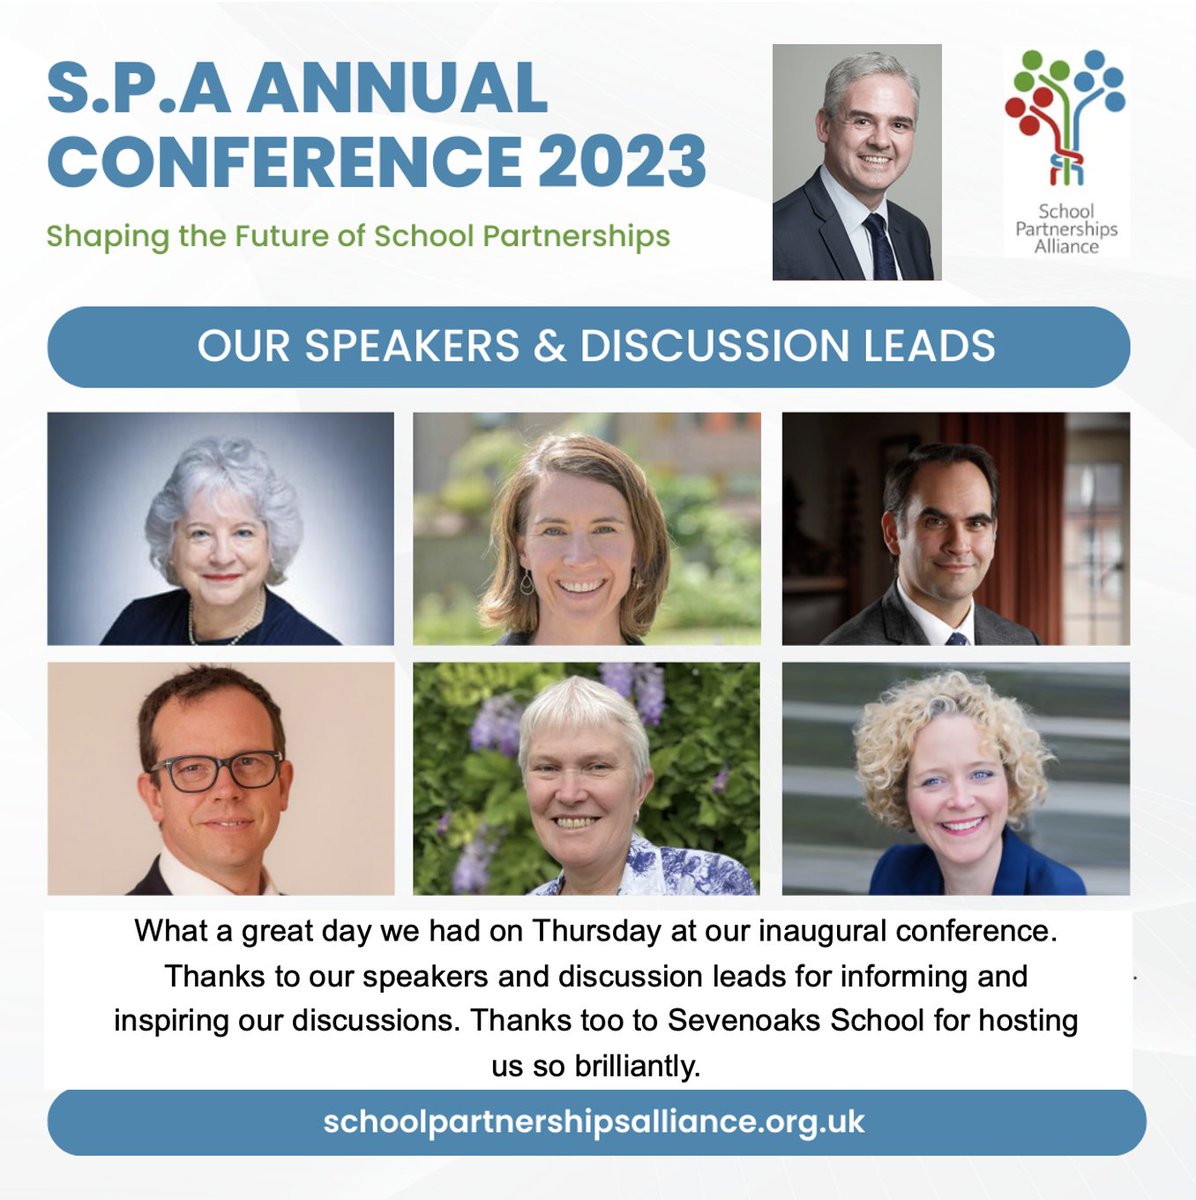 #SPAConference2023